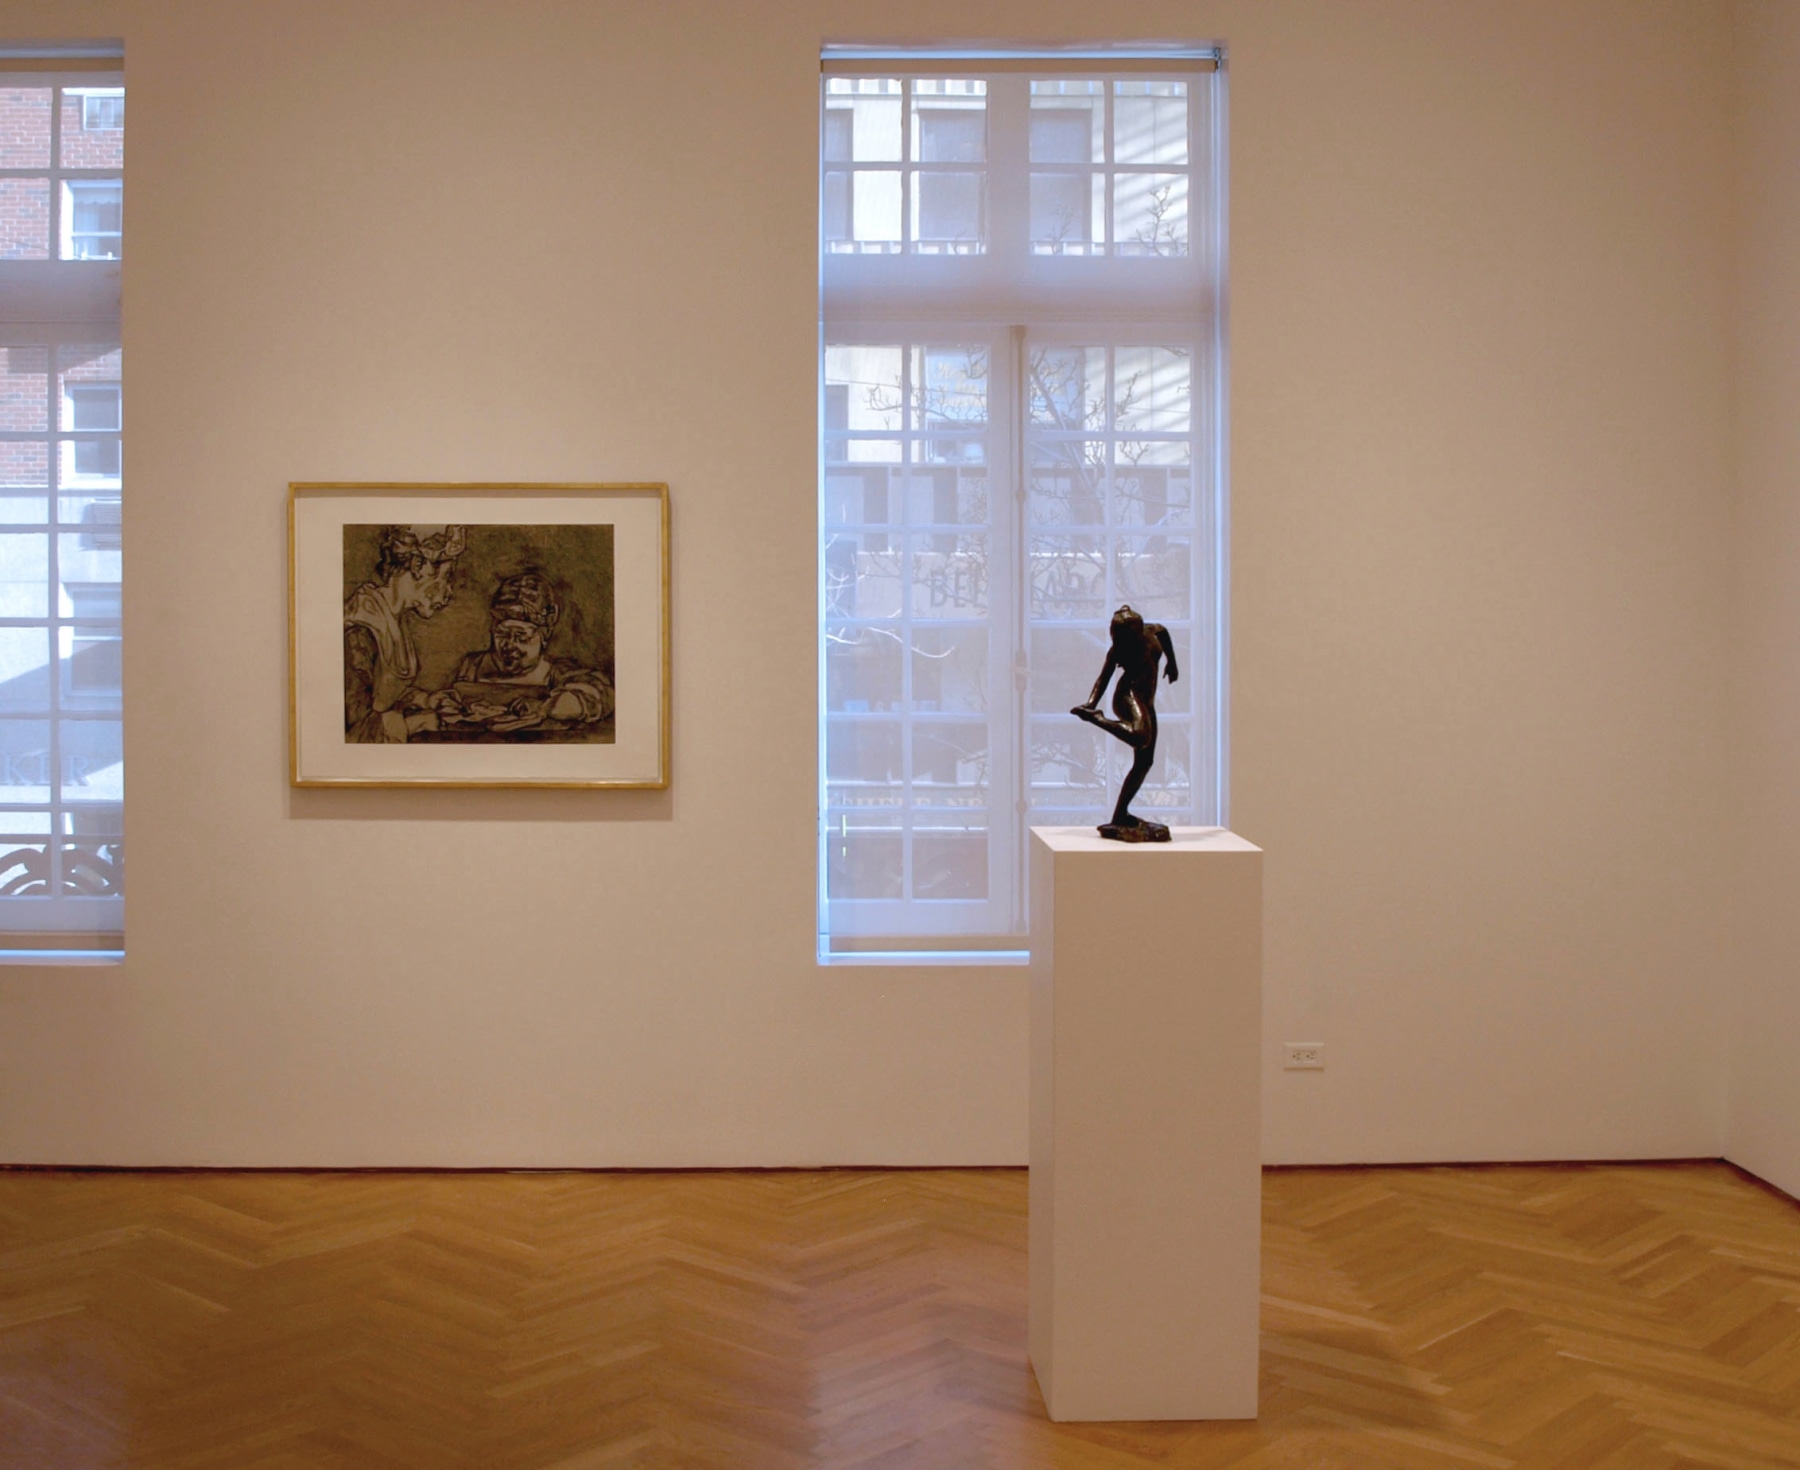 Lucian Freud and Sculpture